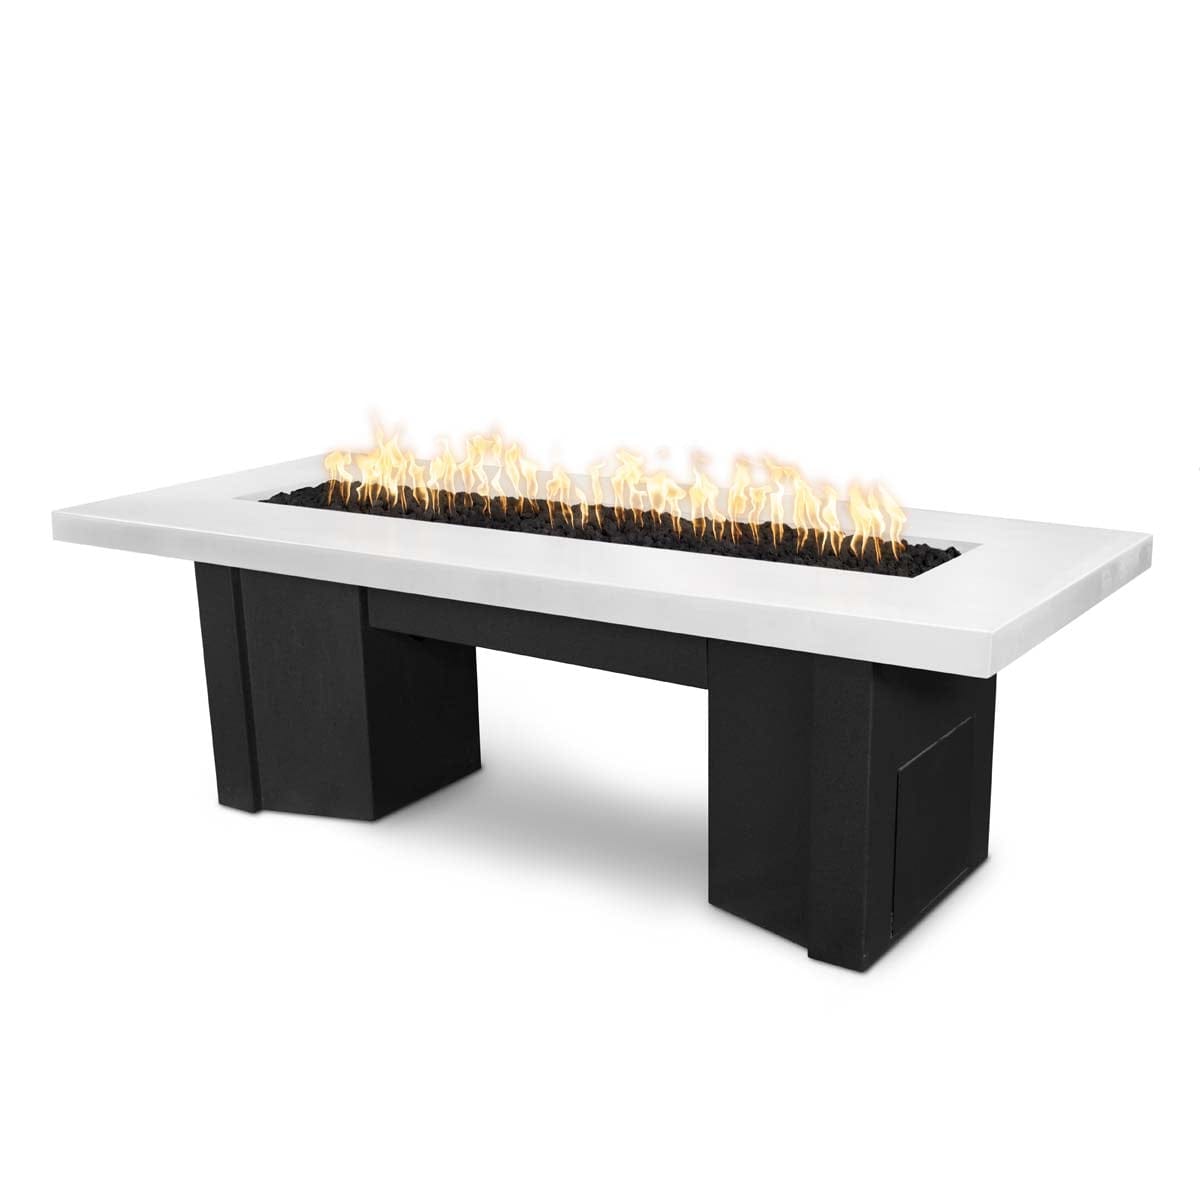 The Outdoor Plus Fire Features The Outdoor Plus 48", 60", 78" Alameda Rectangular Fire Table - Powder Coated White Top & Black Base / OPT-ALMPCxx-BWC, OPT-ALMPCxx-BWCFSML, OPT-ALMPCxx-BWCFSEN, OPT-ALMPCxx-BWCE12V, OPT-ALMPCxx-BWCEKIT